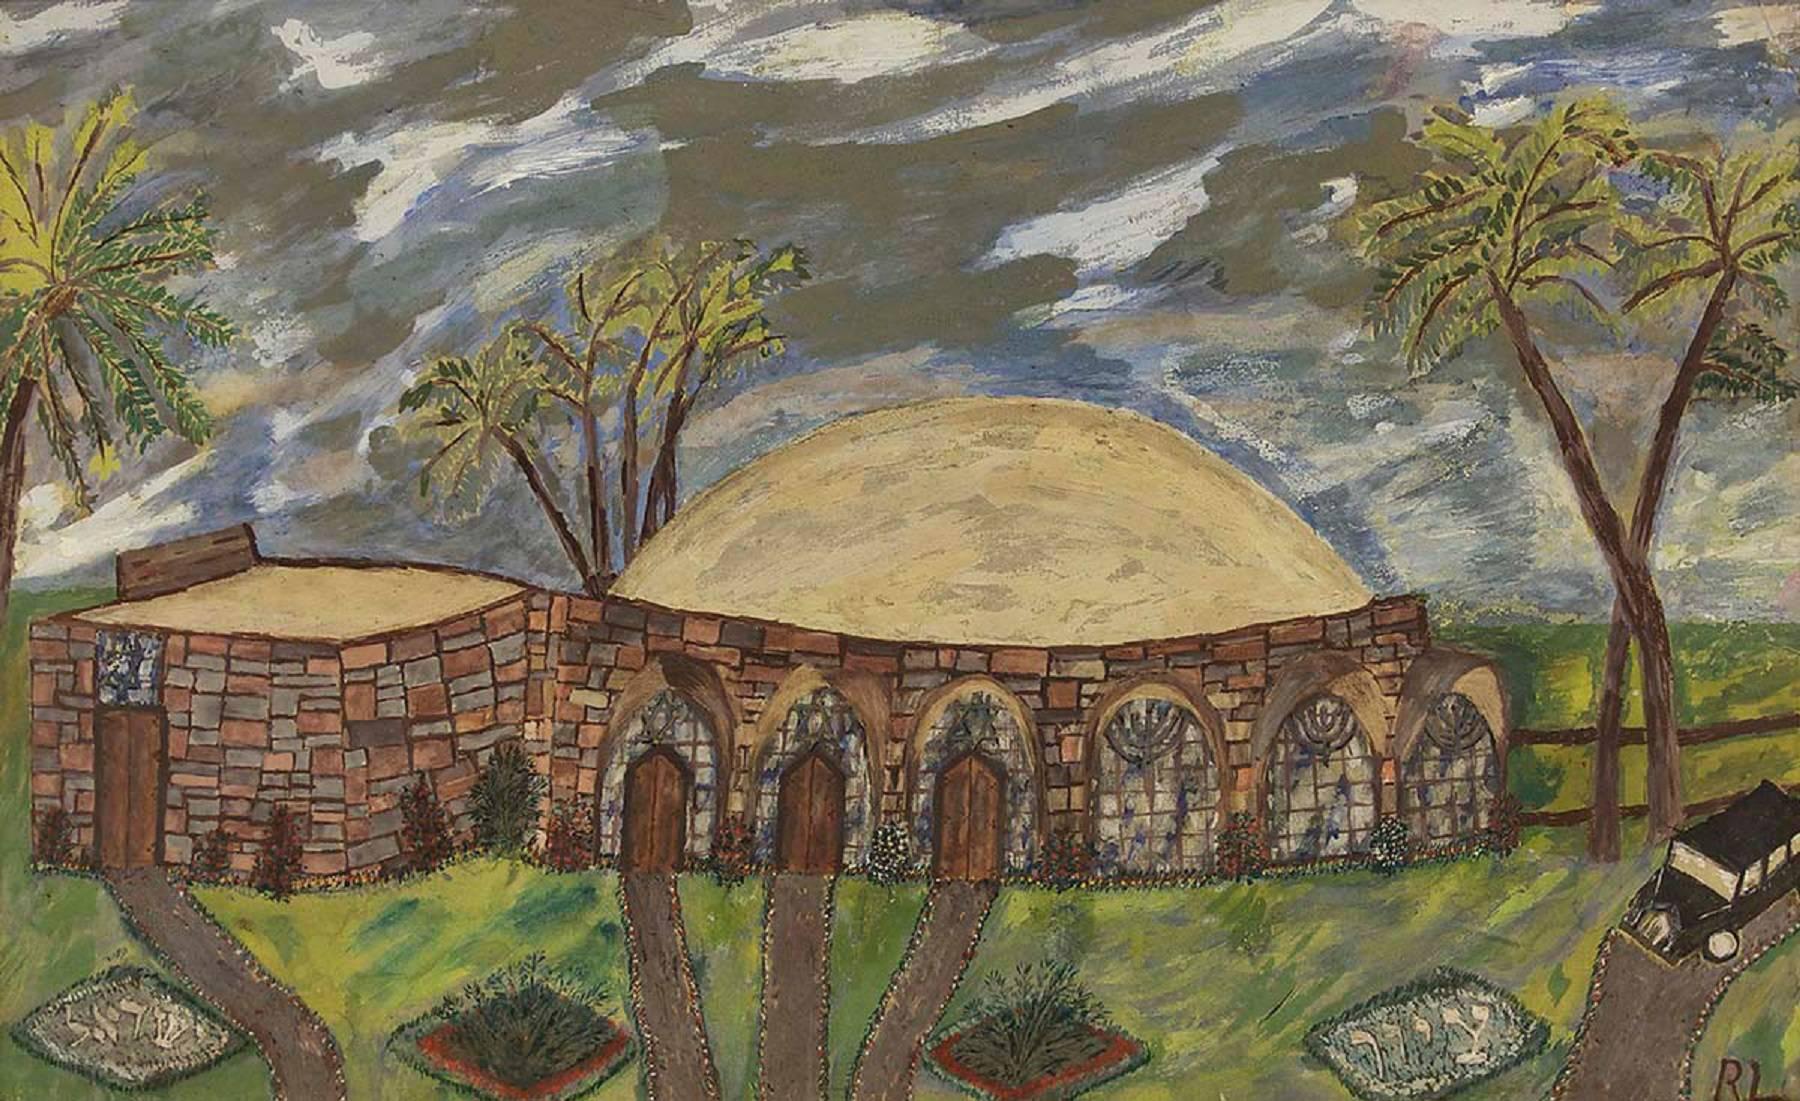 Outsider Art Judaica Synagogue or Tomb in Israel - Painting by Rebecca Levy